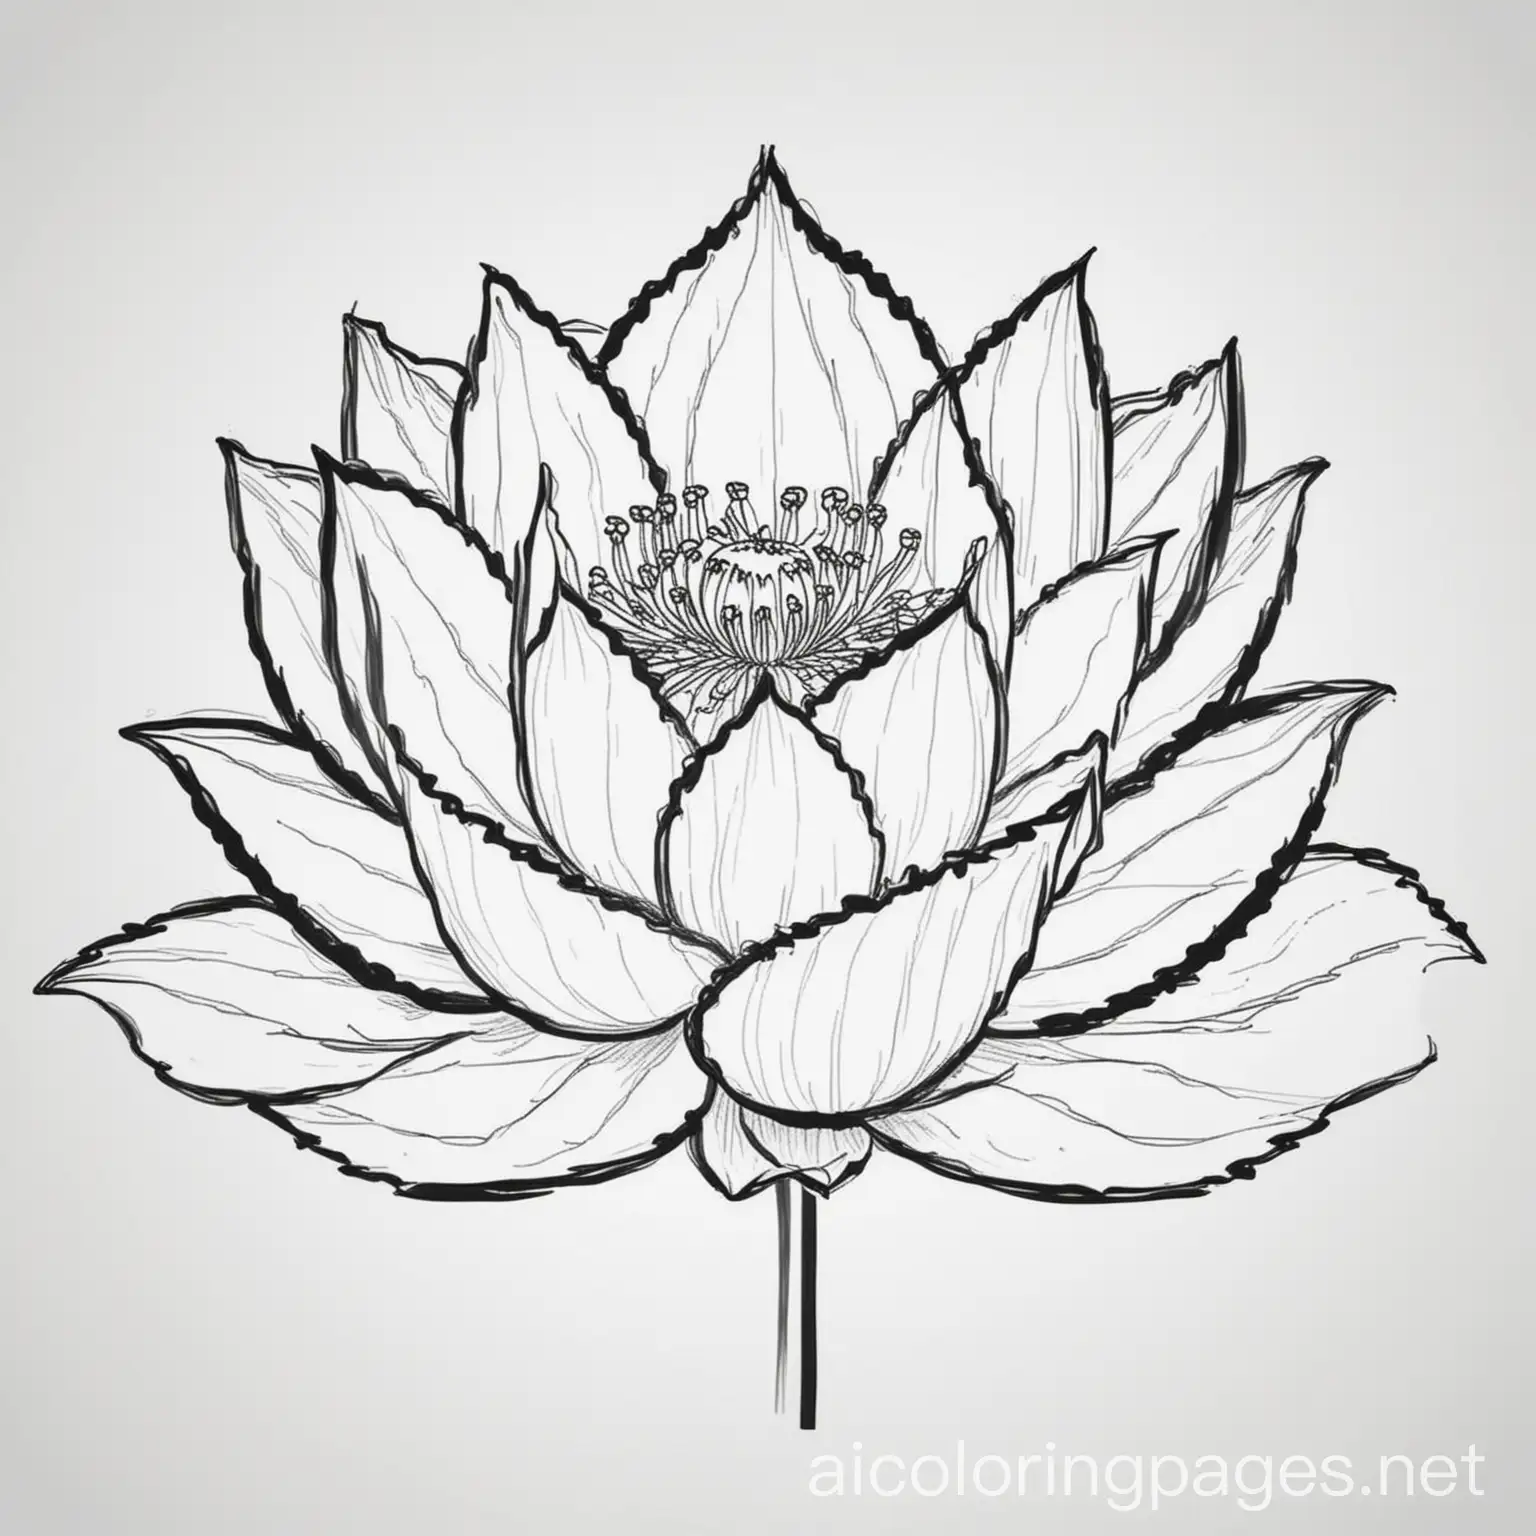 lotus flower, Coloring Page, black and white, line art, white background, Simplicity, Ample White Space. The background of the coloring page is plain white to make it easy for young children to color within the lines. The outlines of all the subjects are easy to distinguish, making it simple for kids to color without too much difficulty